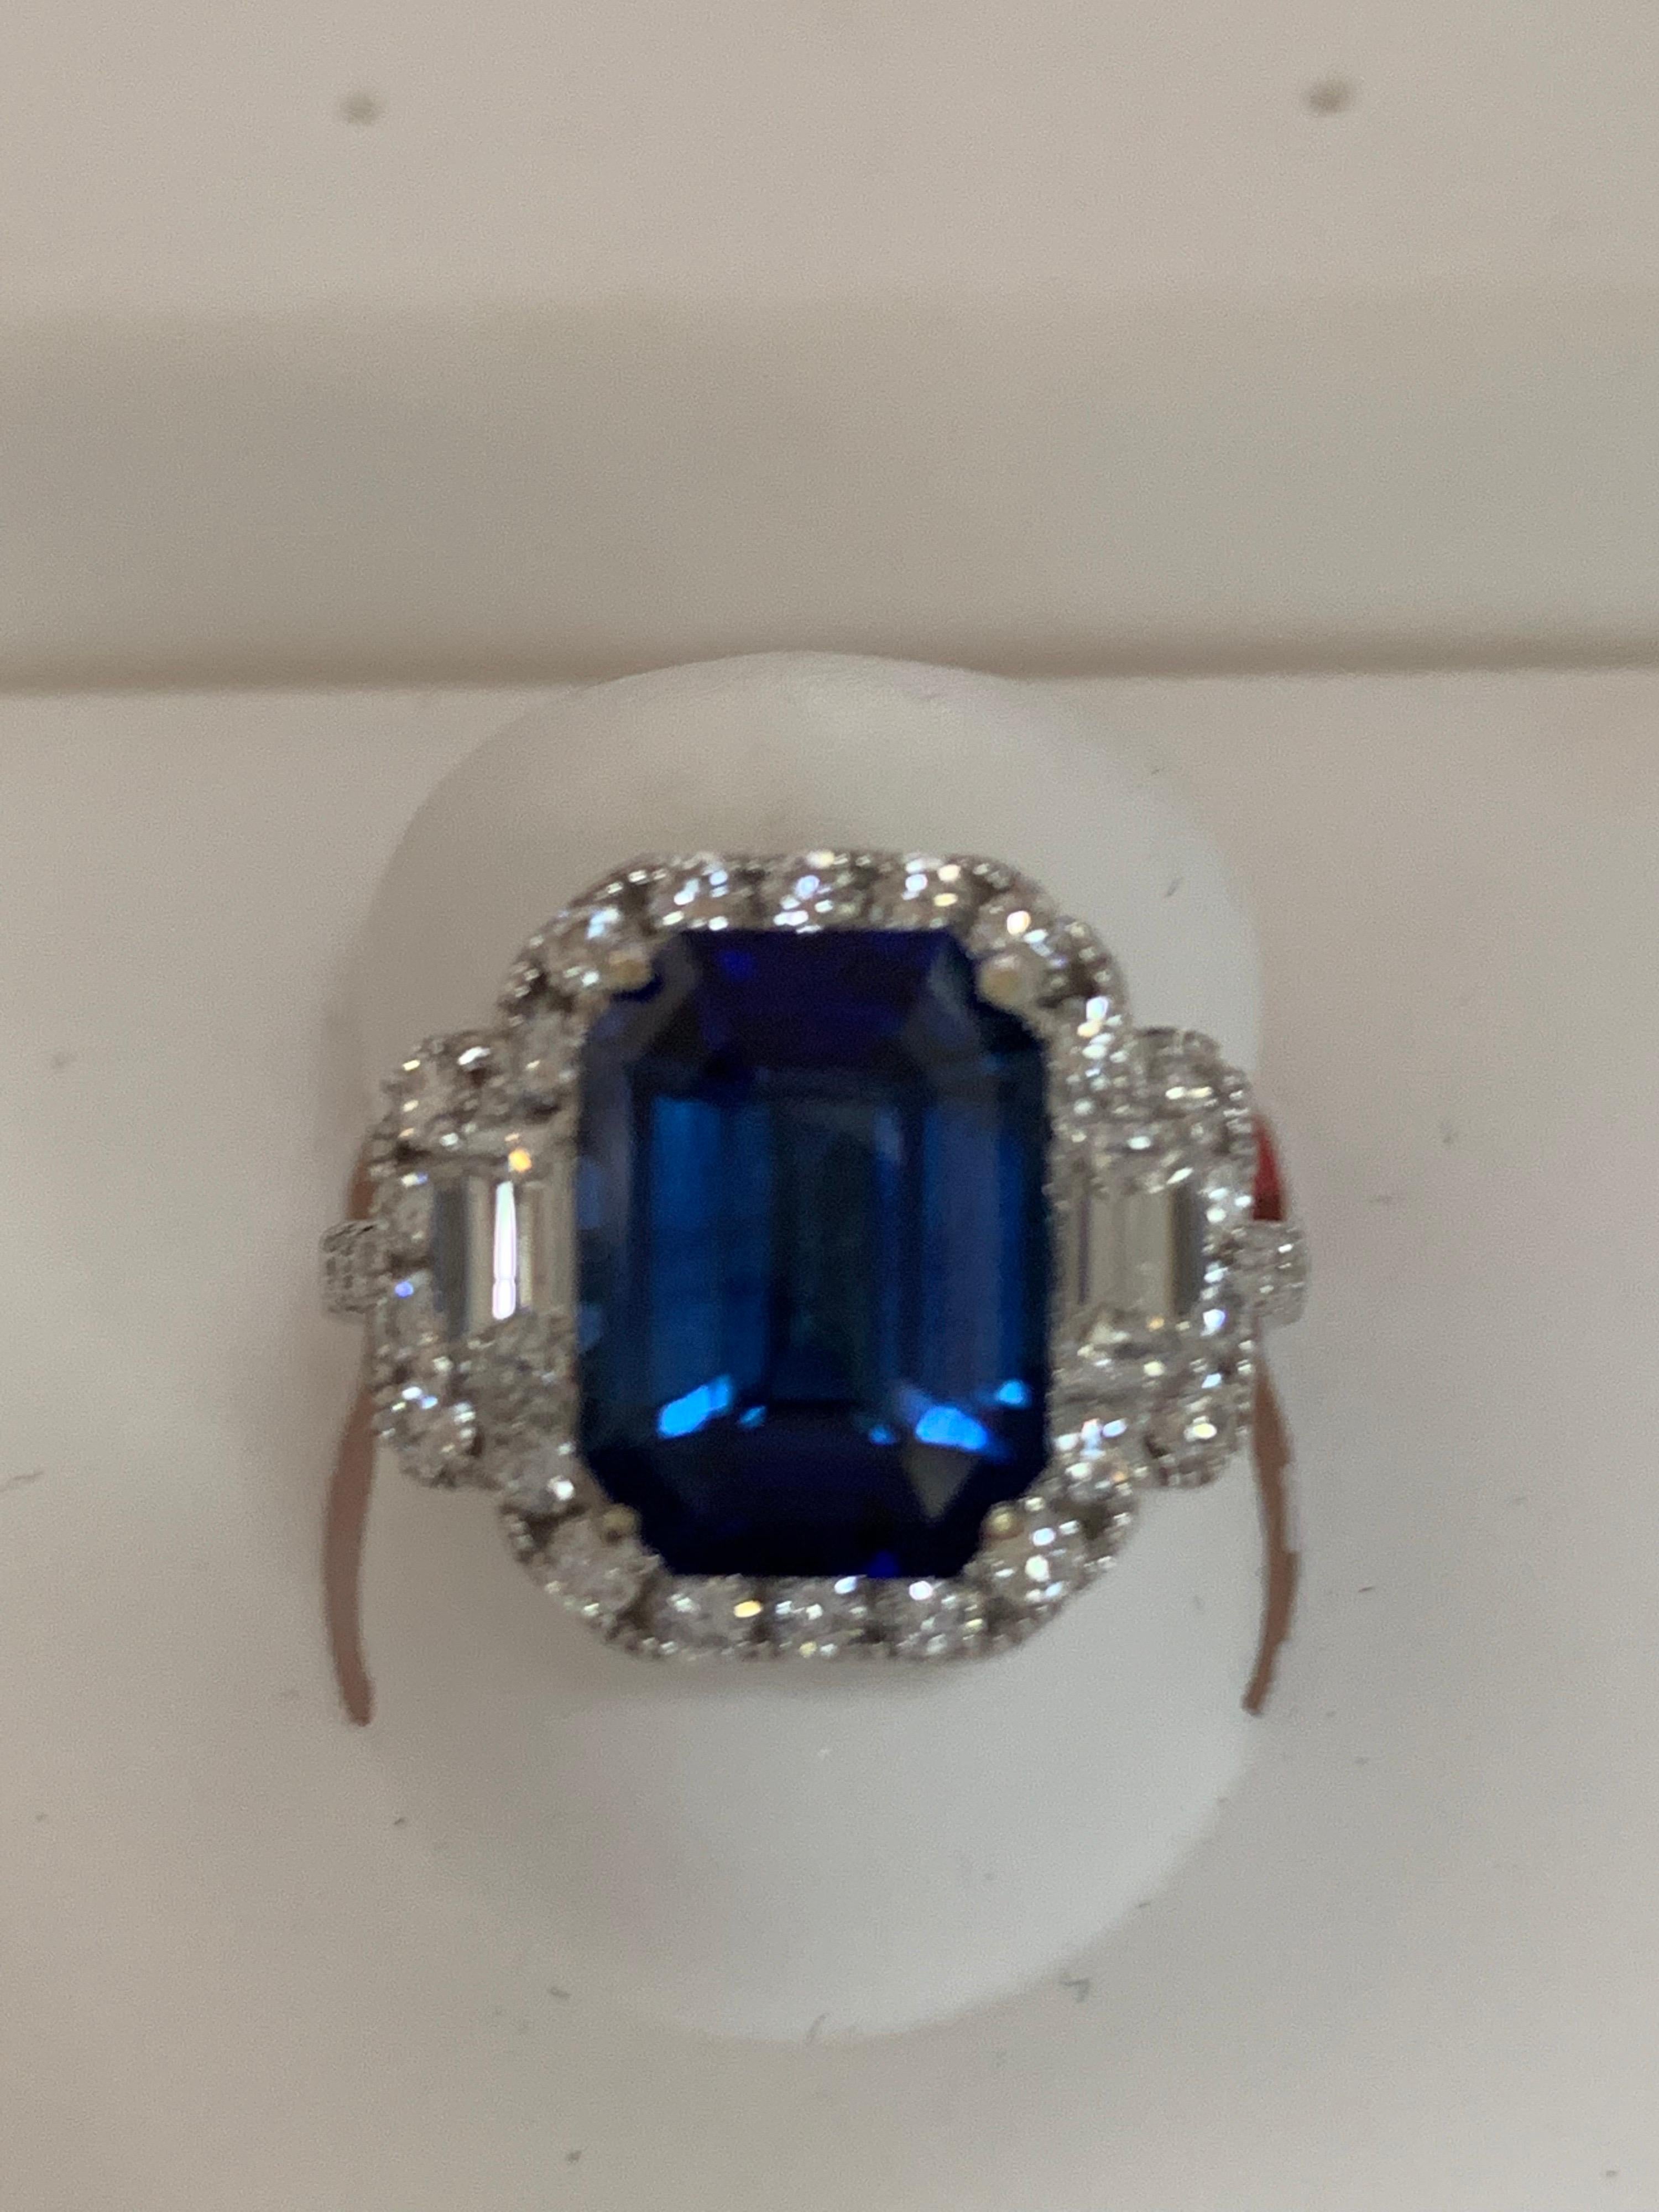 Natural GIA Certified 6.26 Carat Blue sapphire and total 1. 15 carat white diamonds set in 14 Karat white gold is one of a kind handcrafted ring, The ring is size 7 but can be resized if needed.